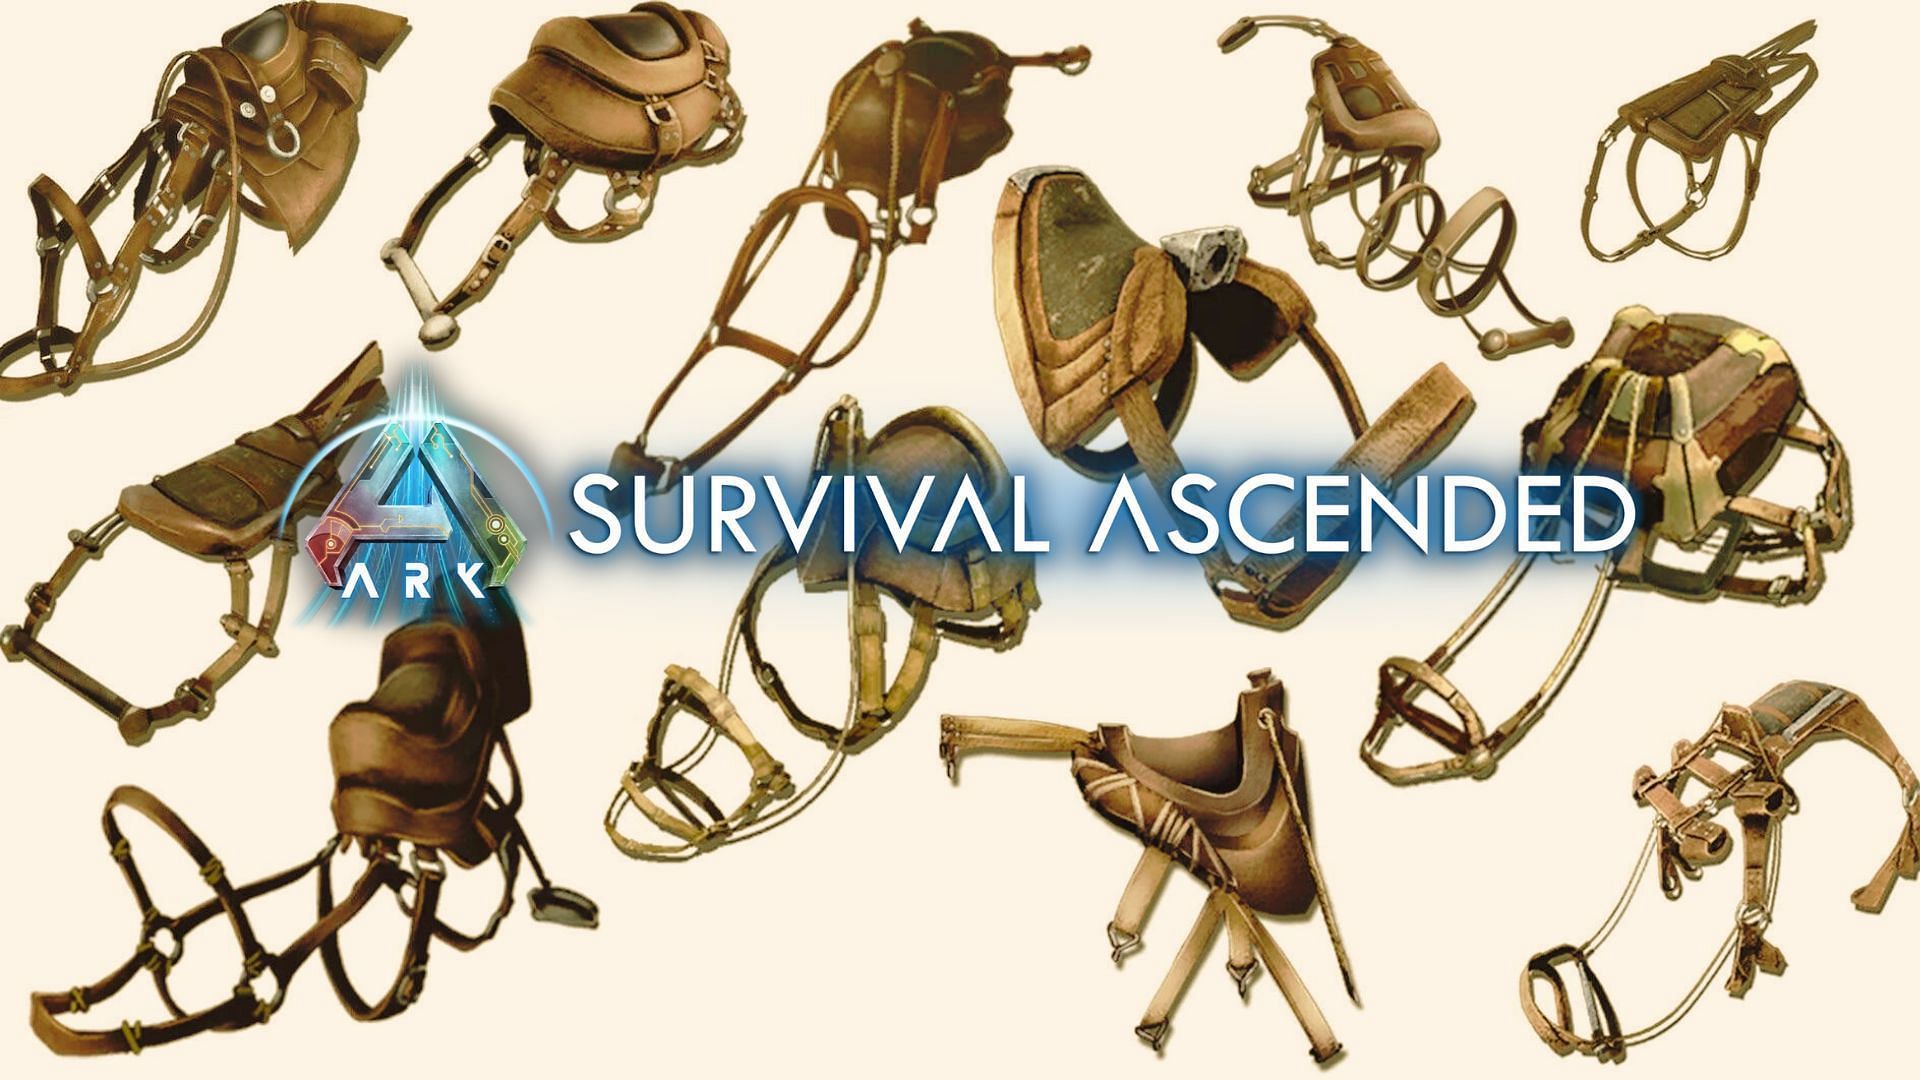 Crafting all the saddles in Ark Survival Ascended (Image via Studio Wildcard)